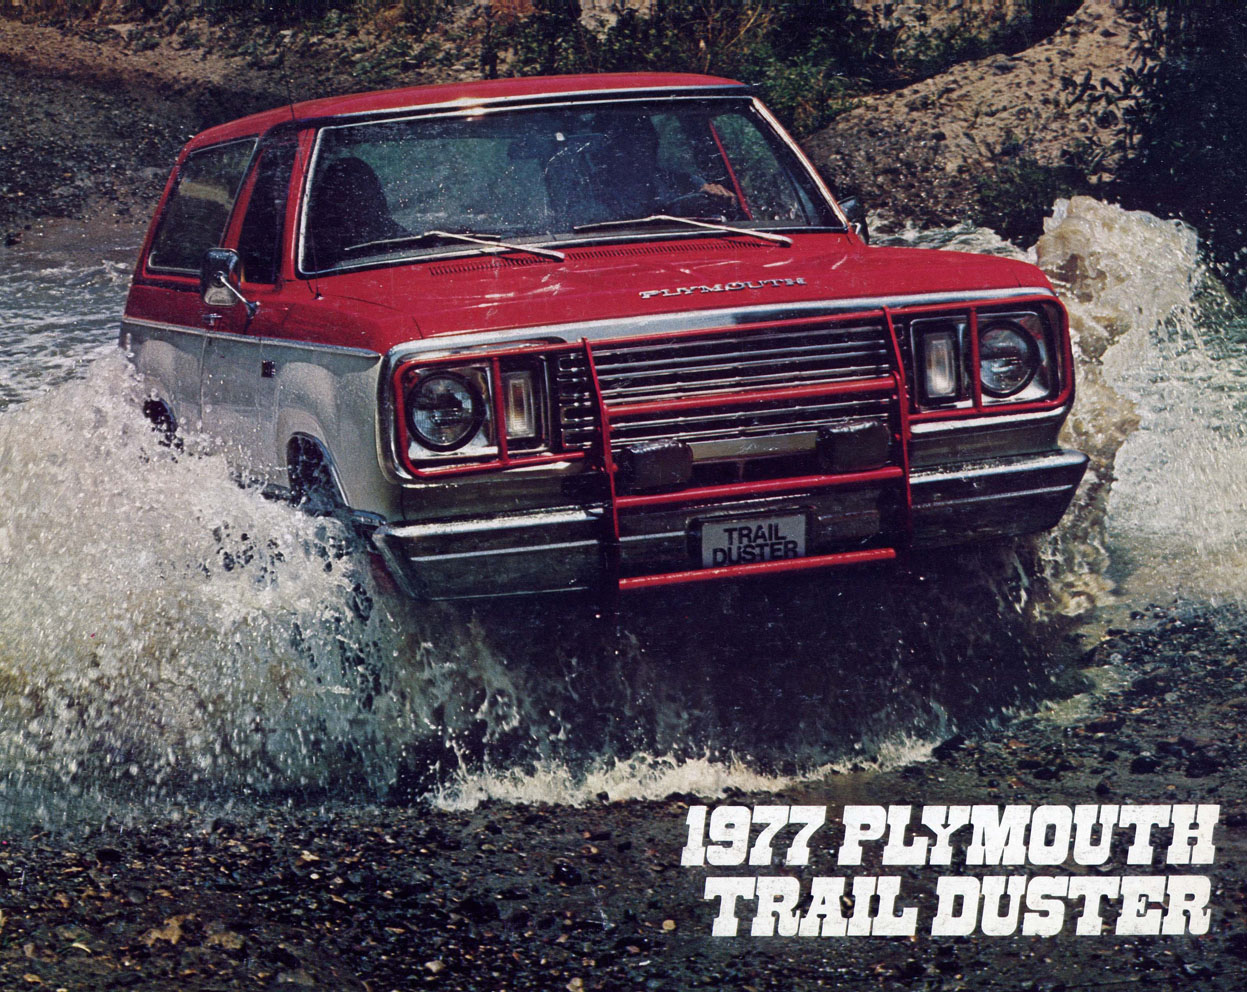 1977_Plymouth_Trail_Duster-01